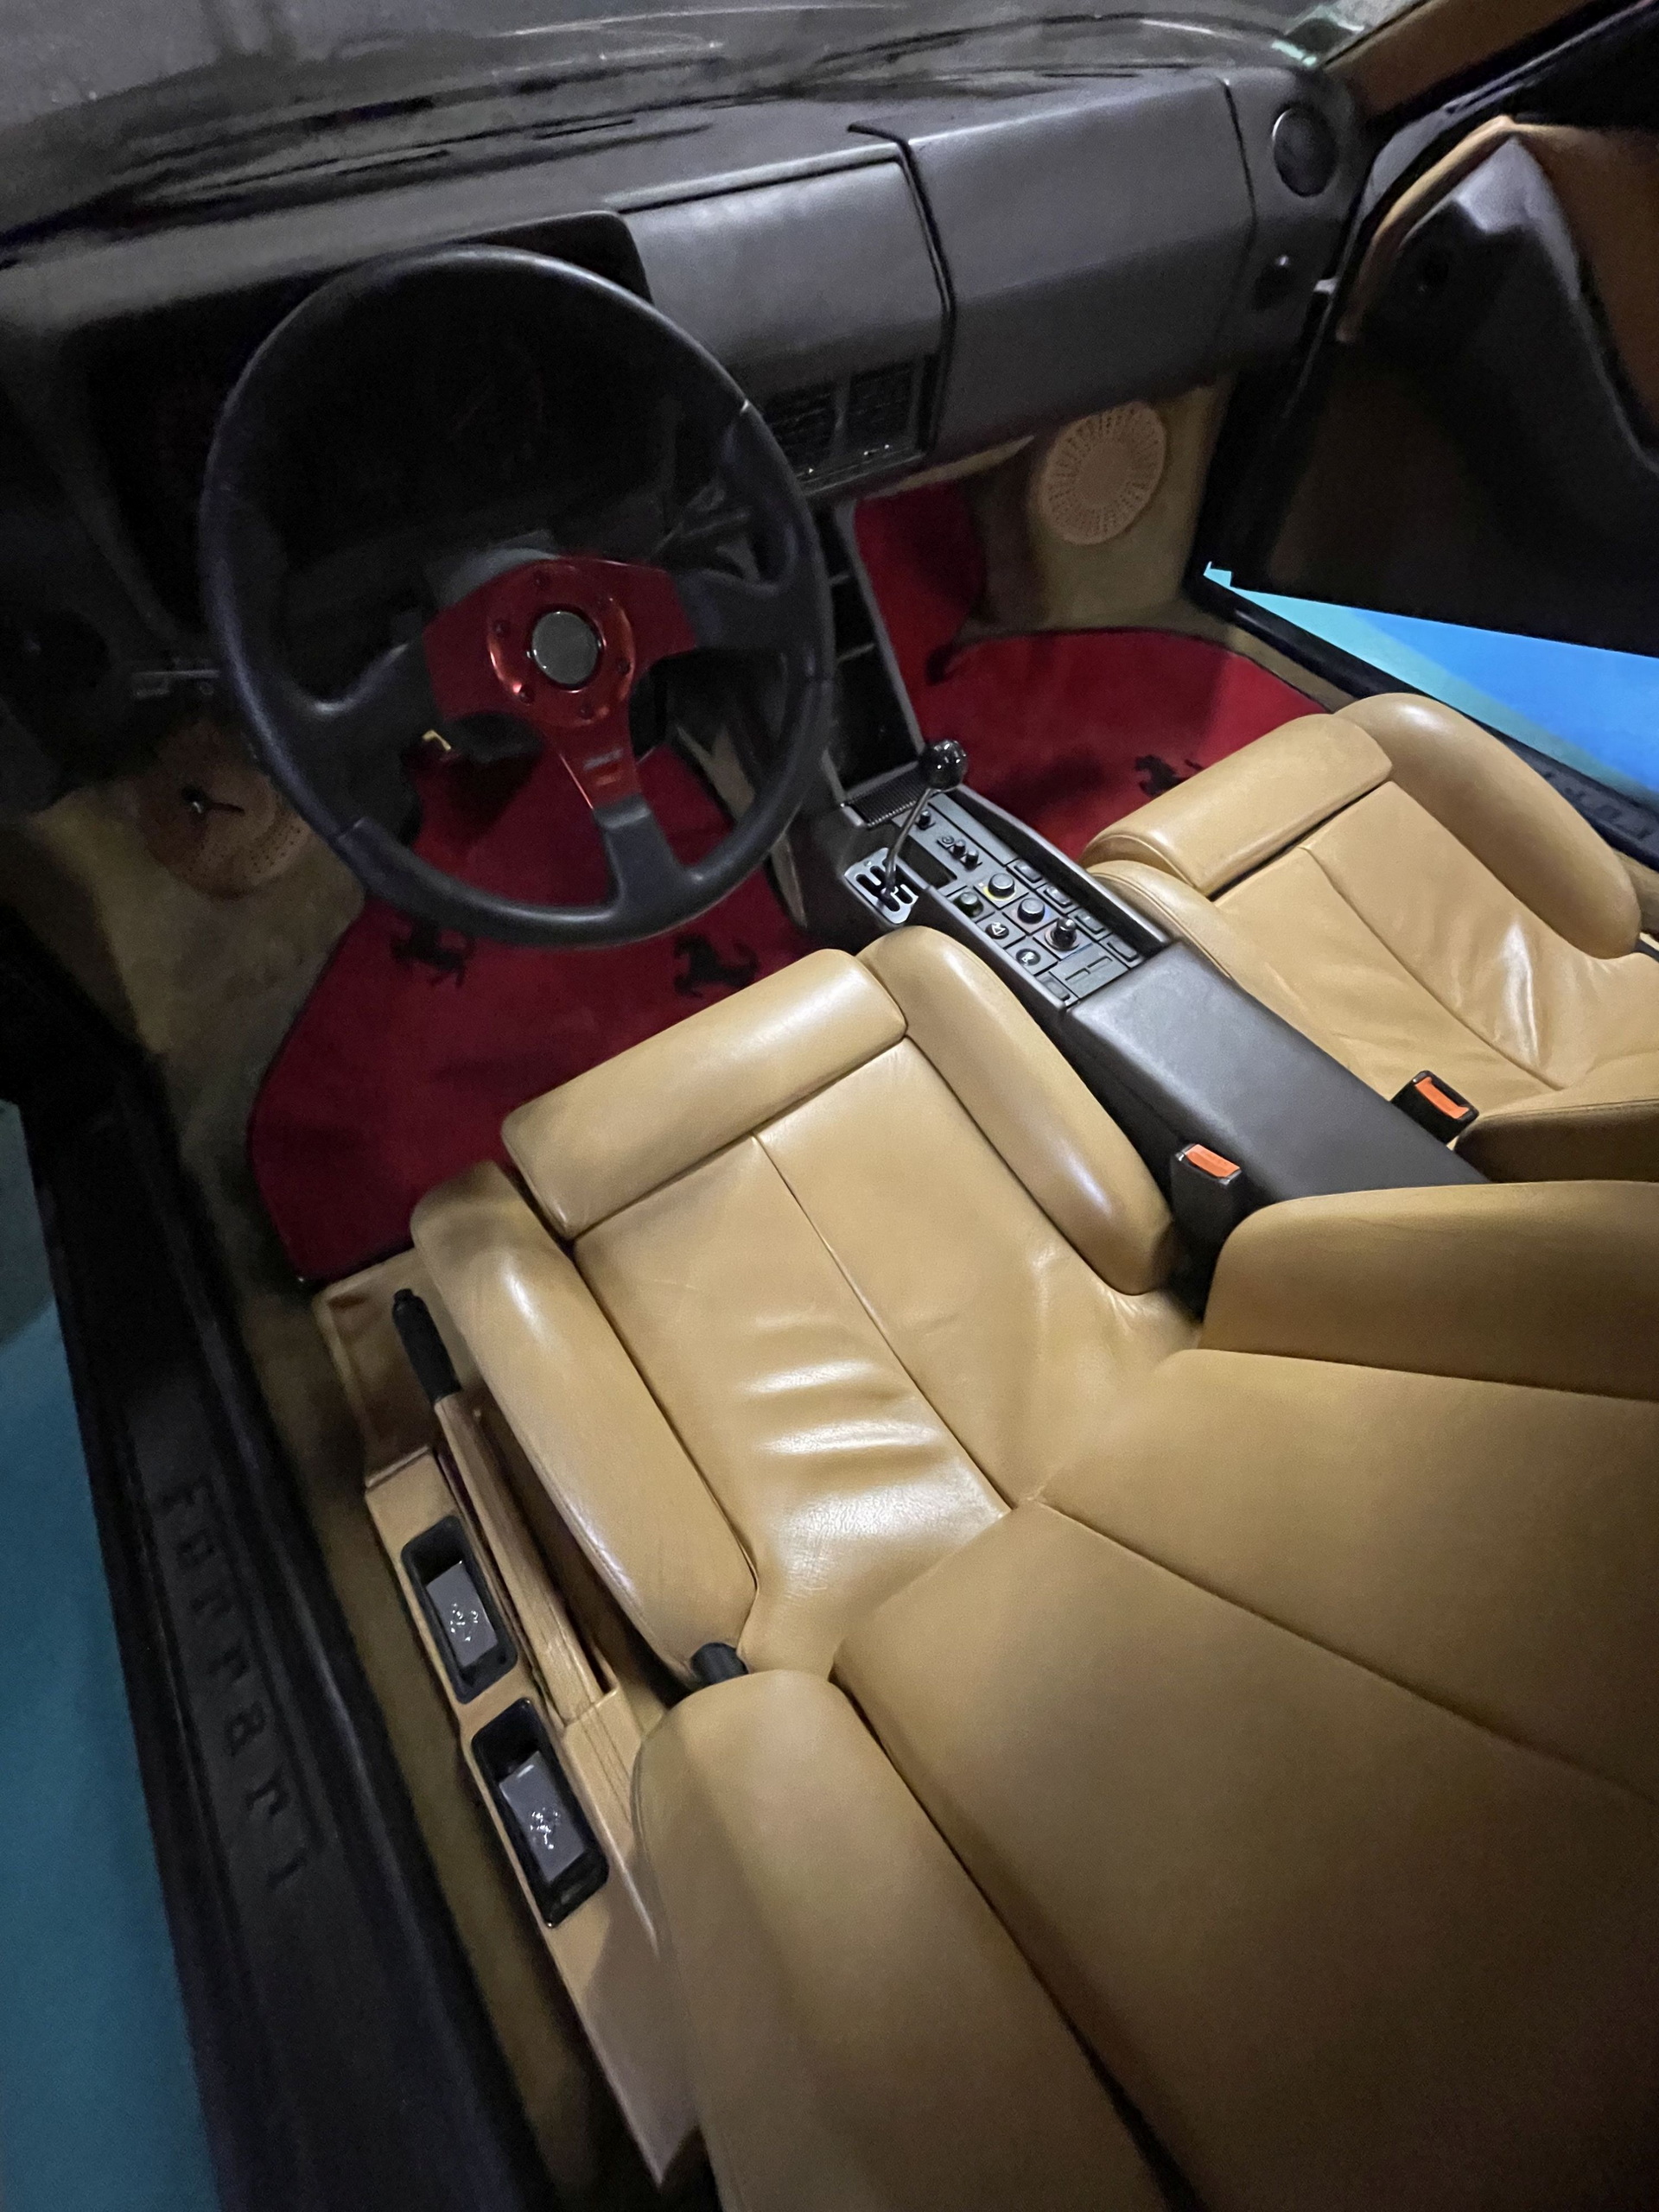 After 20 years of collecting dust in the garage, it's time for someone to drive a 1989 Ferrari Testarossa.